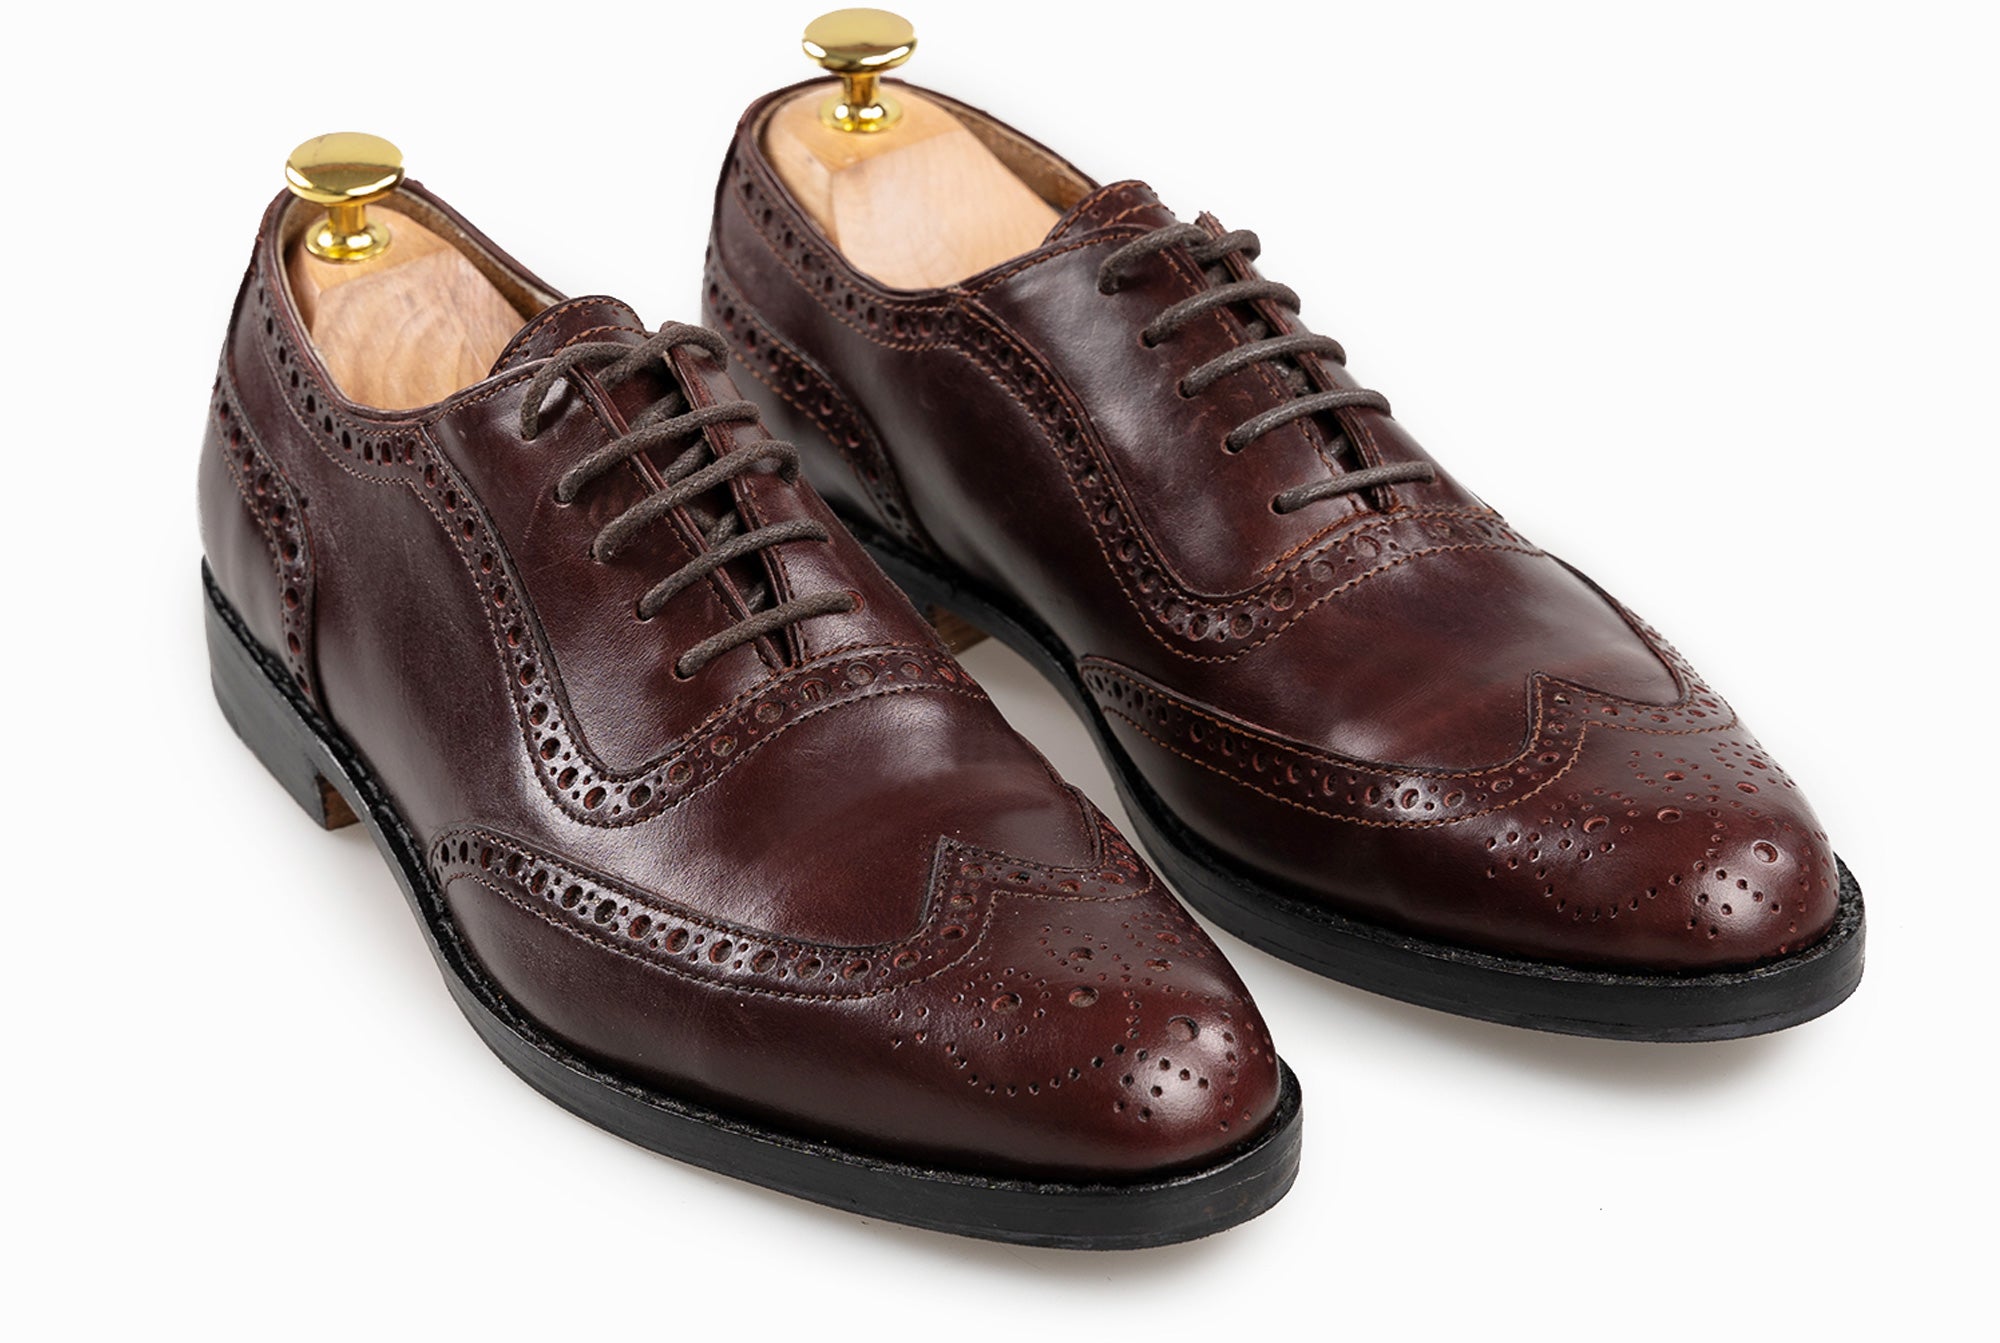 The Grand Wingtip Oxford - Oxblood 